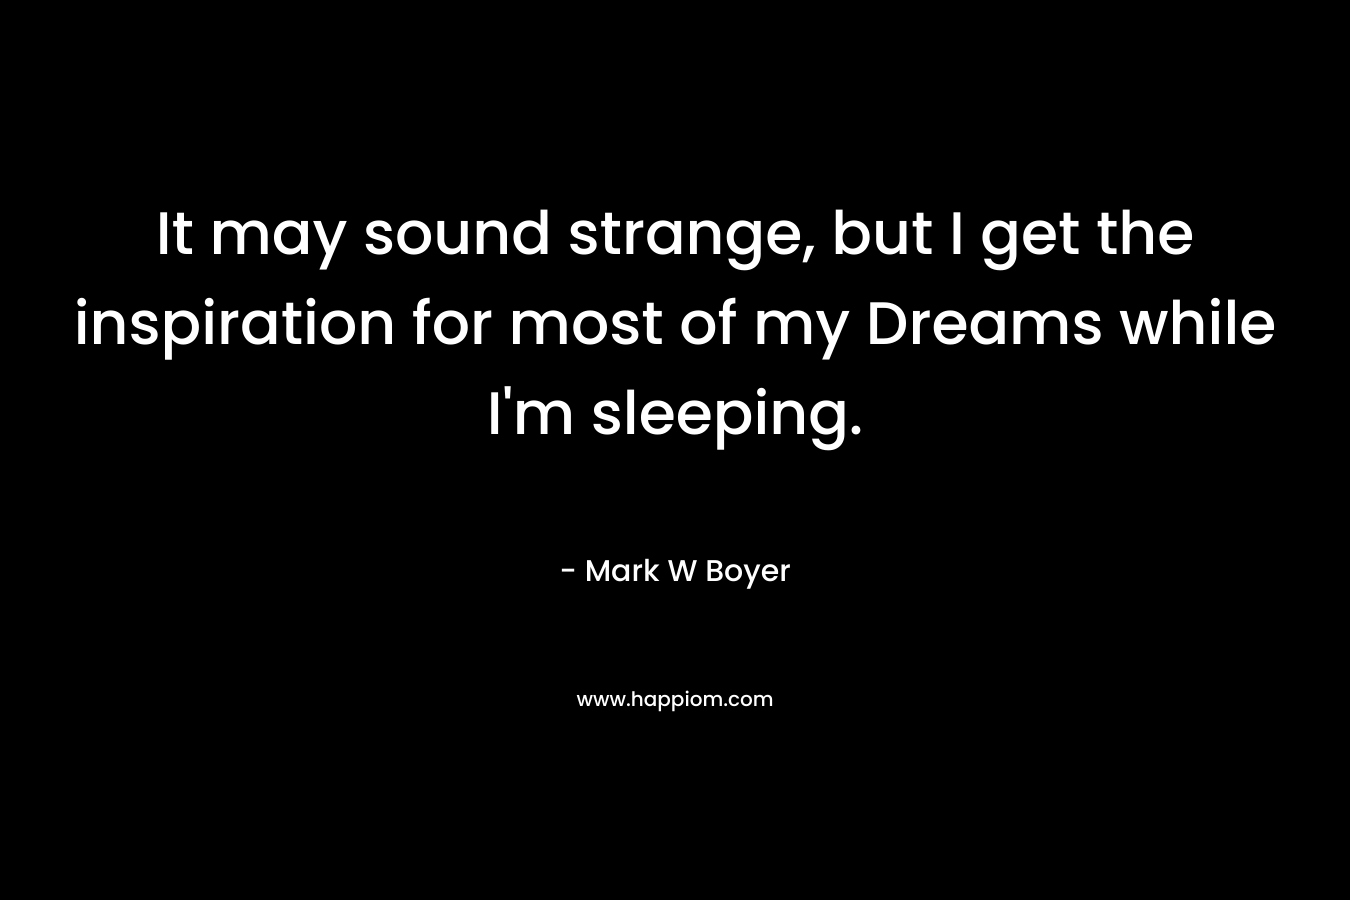 It may sound strange, but I get the inspiration for most of my Dreams while I’m sleeping. – Mark W Boyer